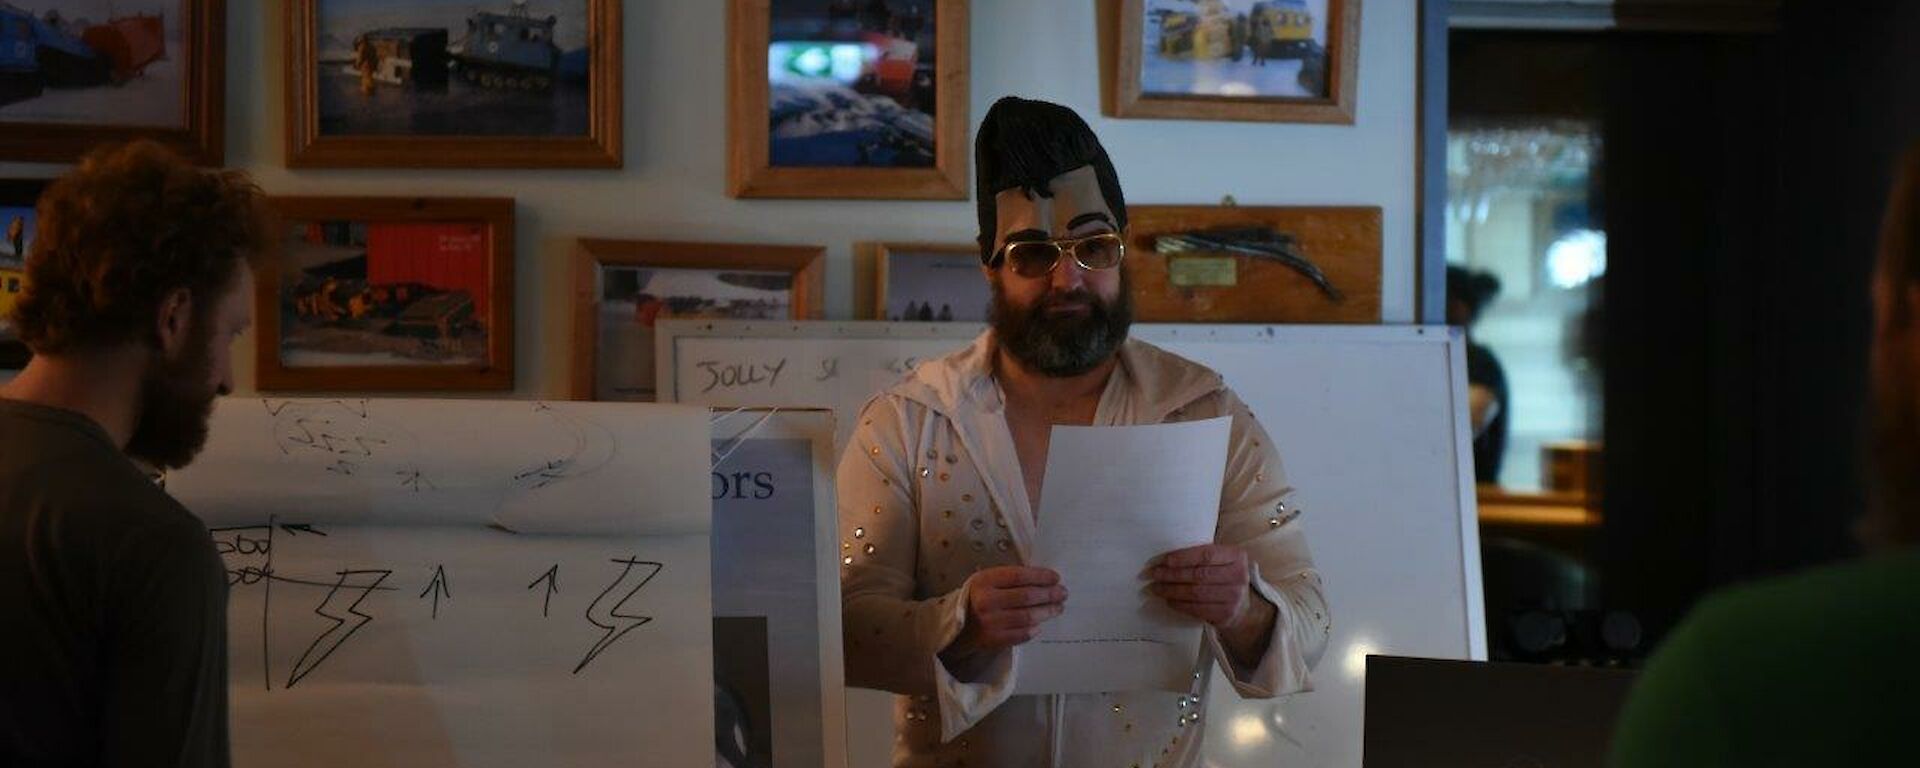 A man dressed as Elvis watches a man drawing